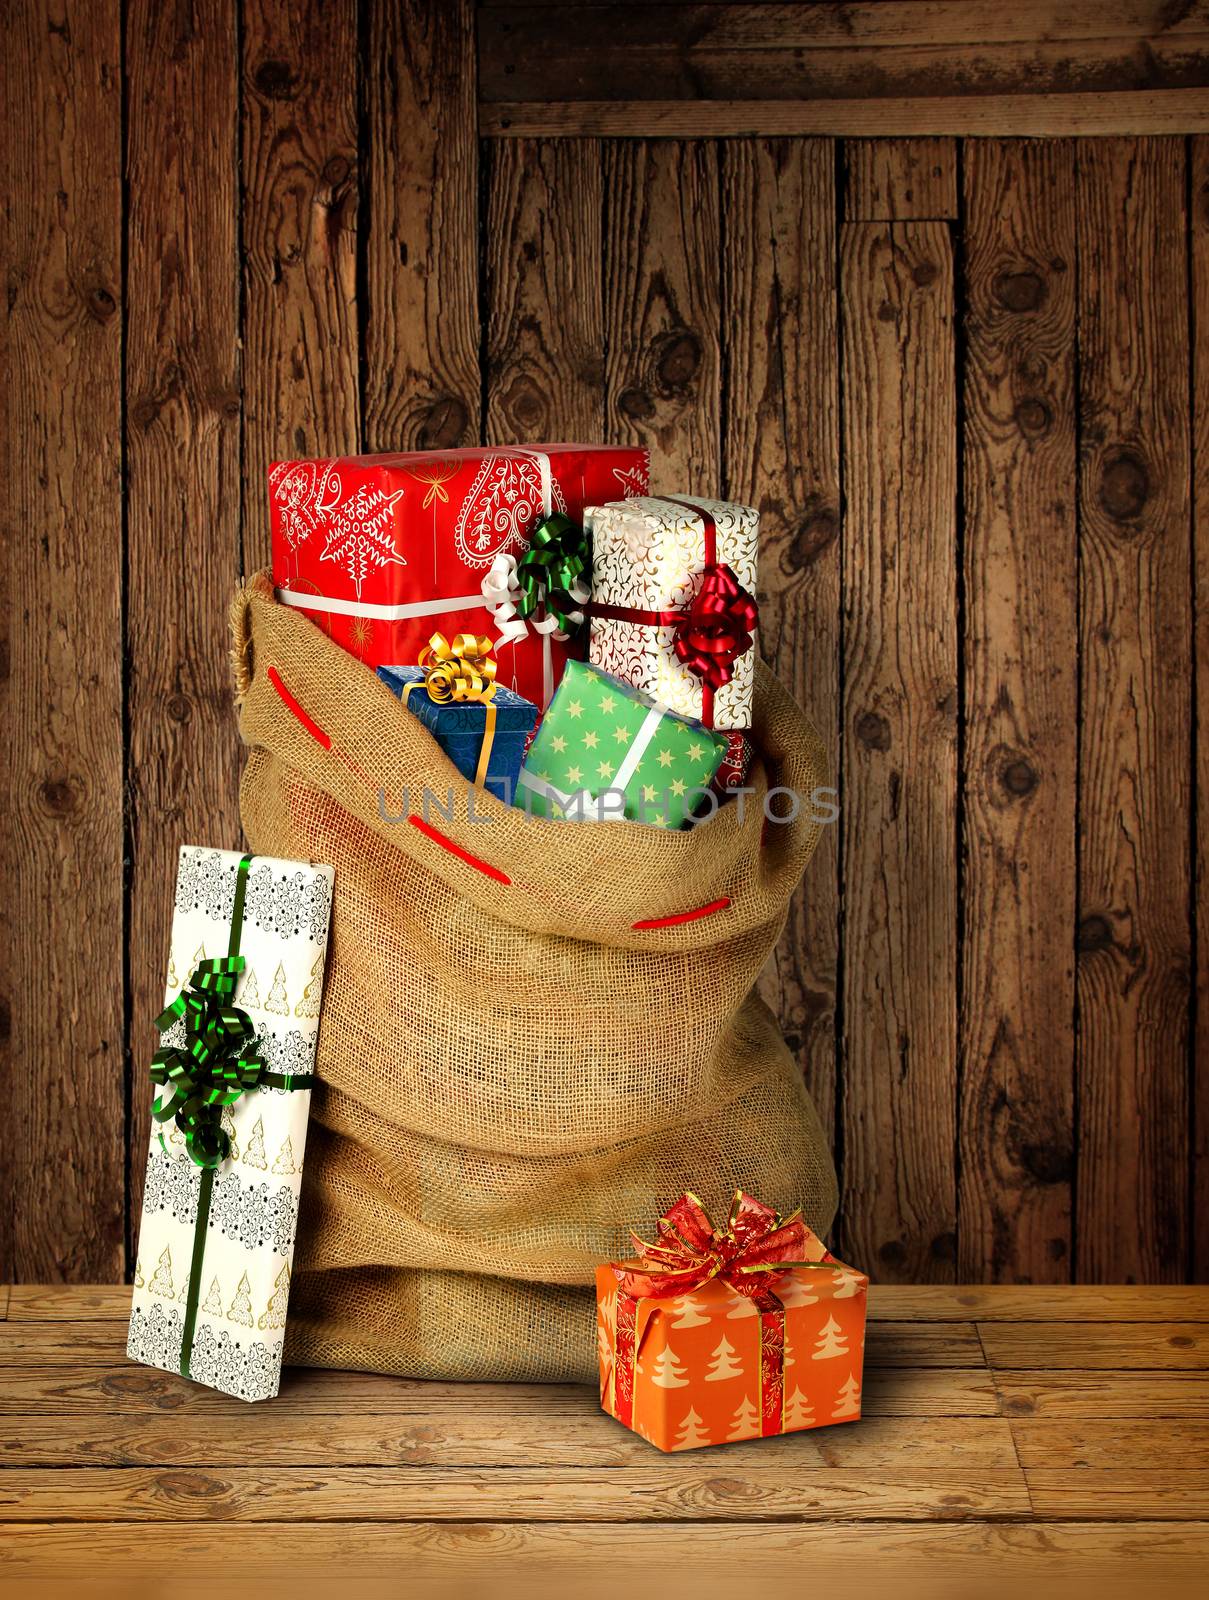 Santas present sack with gift boxes against old rough wooden plank wall